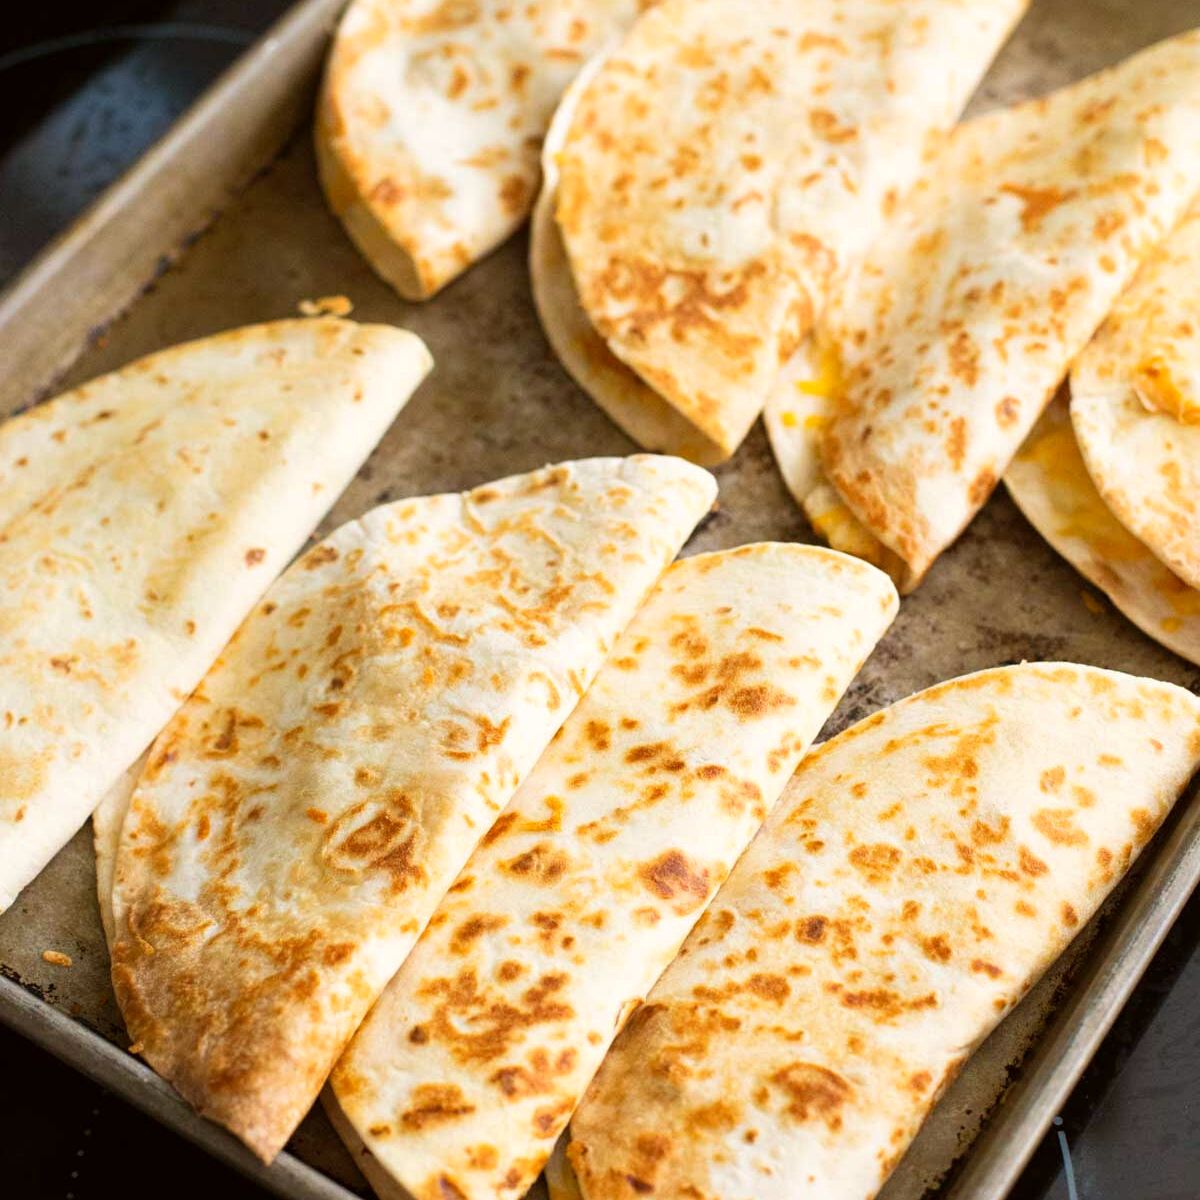 A baking tray filled with baked quesadillas.